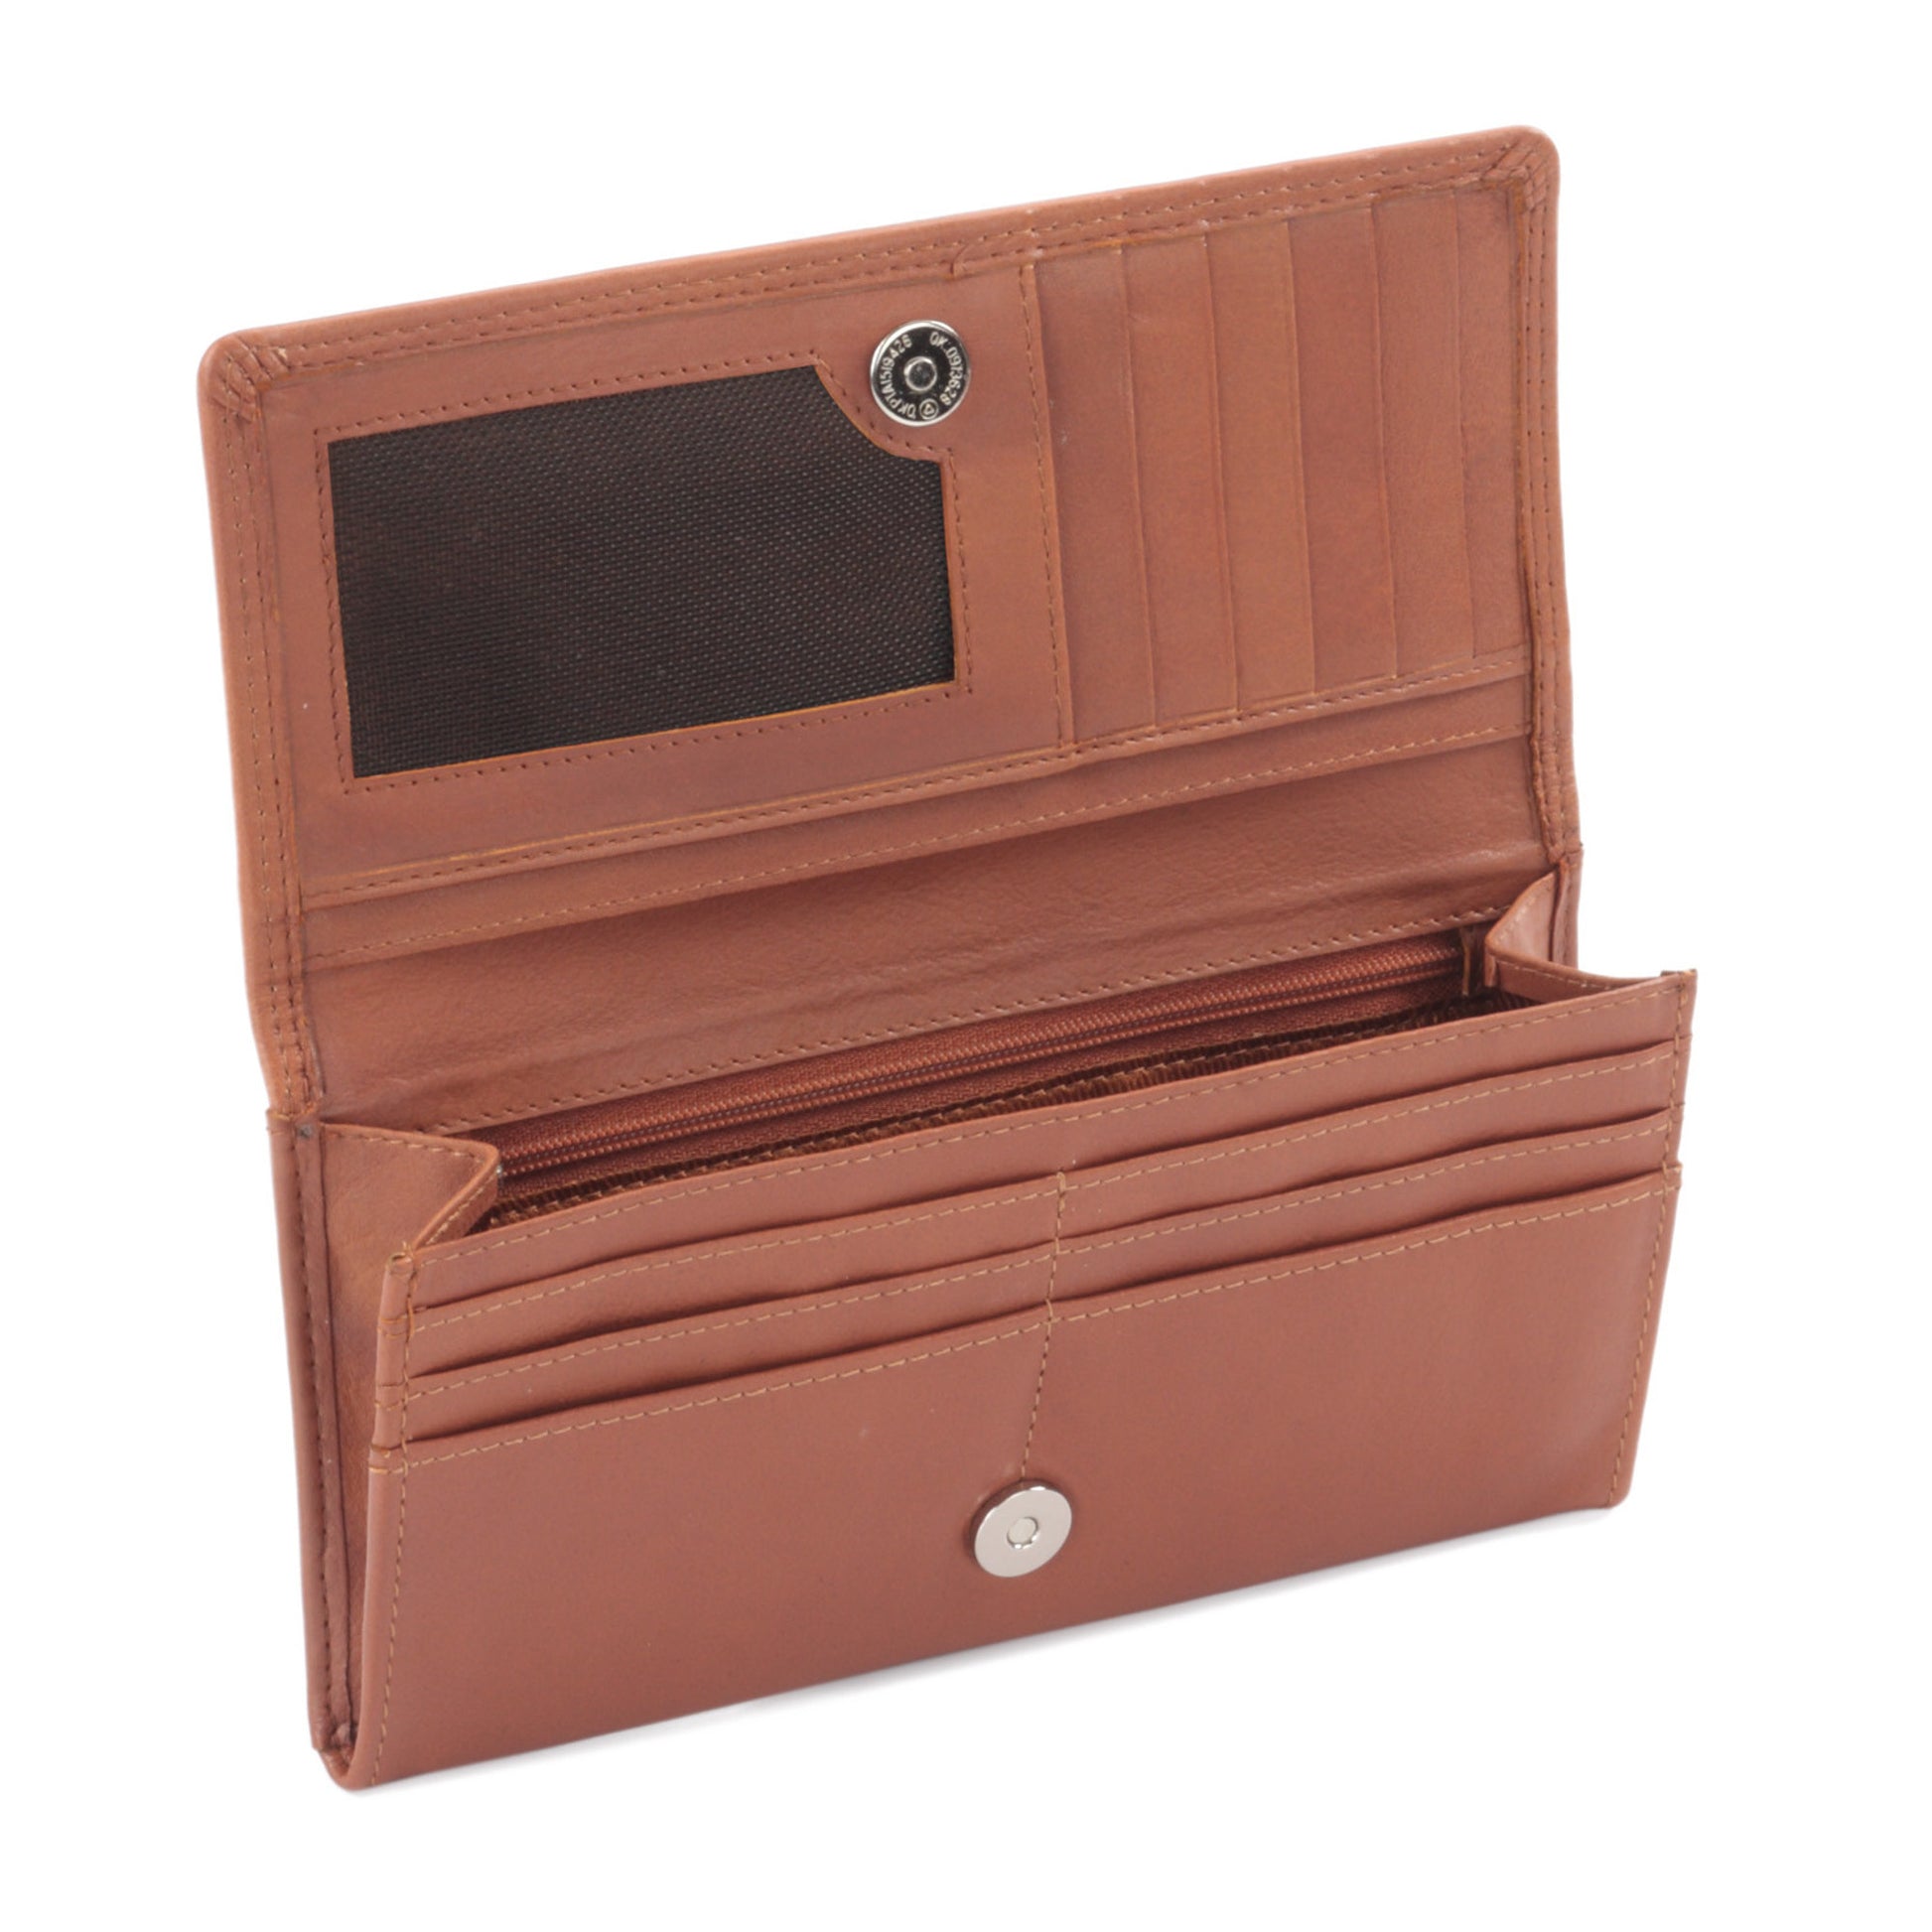 Ladies Clutch Wallet in Cow Leather - cognac or tan color - open view